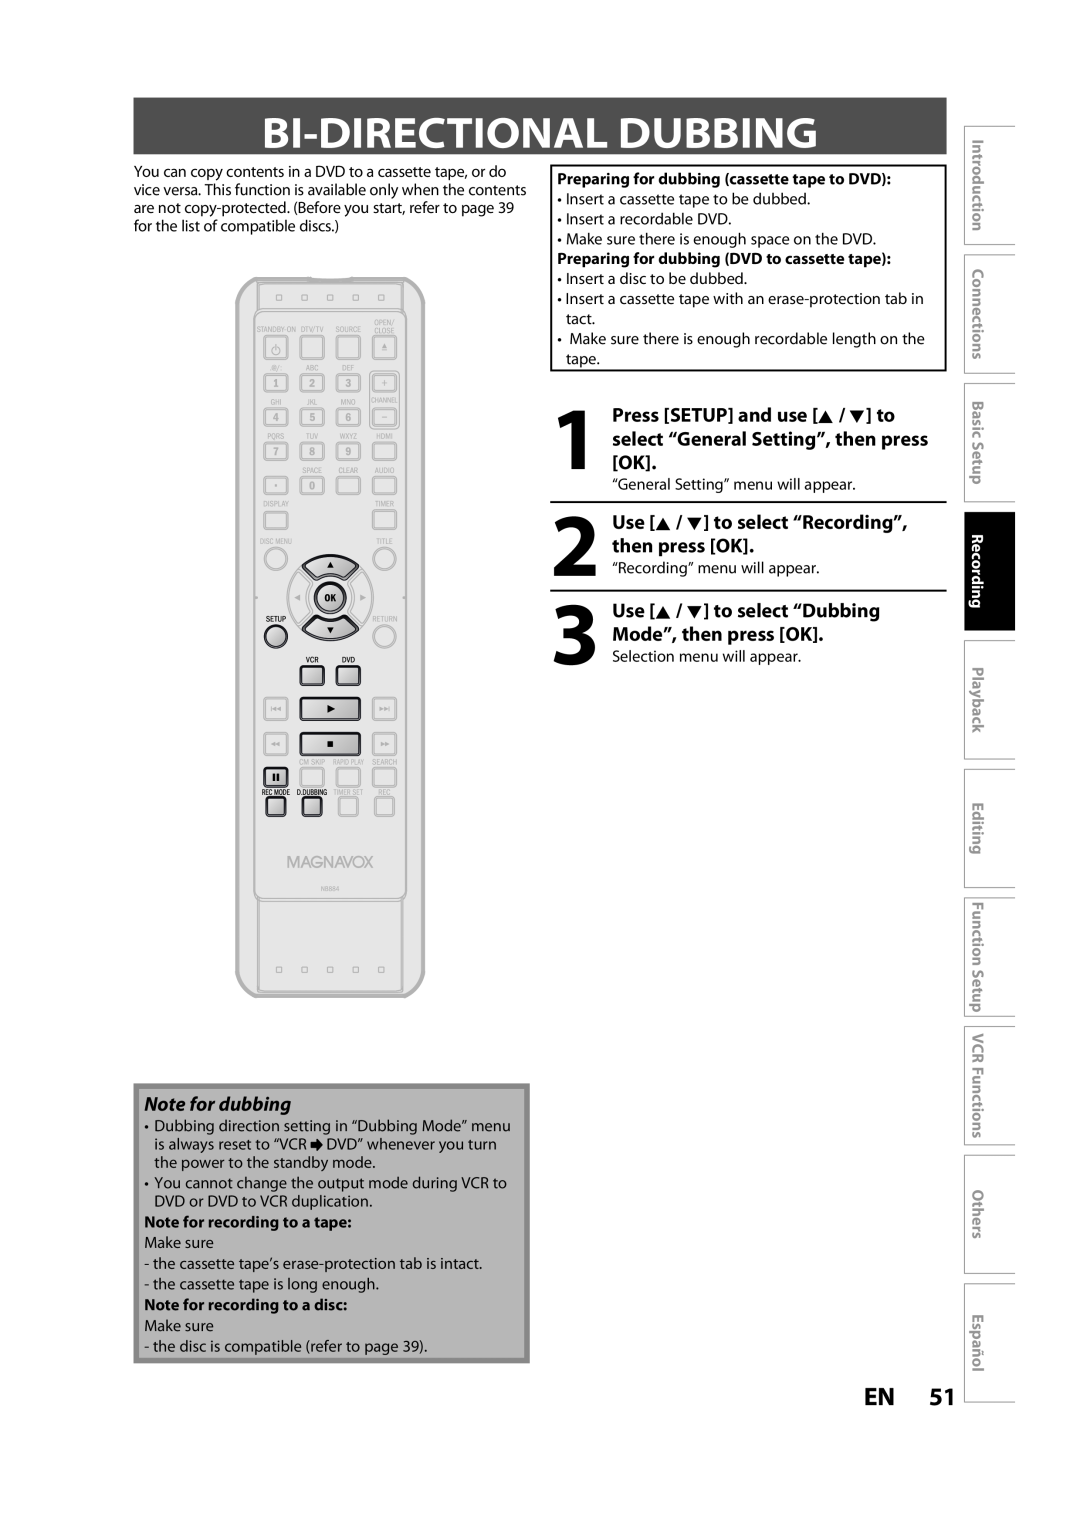 FUNAI ZV457MG9 A owner manual Bi-Directional Dubbing, Use K / L to select “Recording”, then press OK, Note for dubbing 